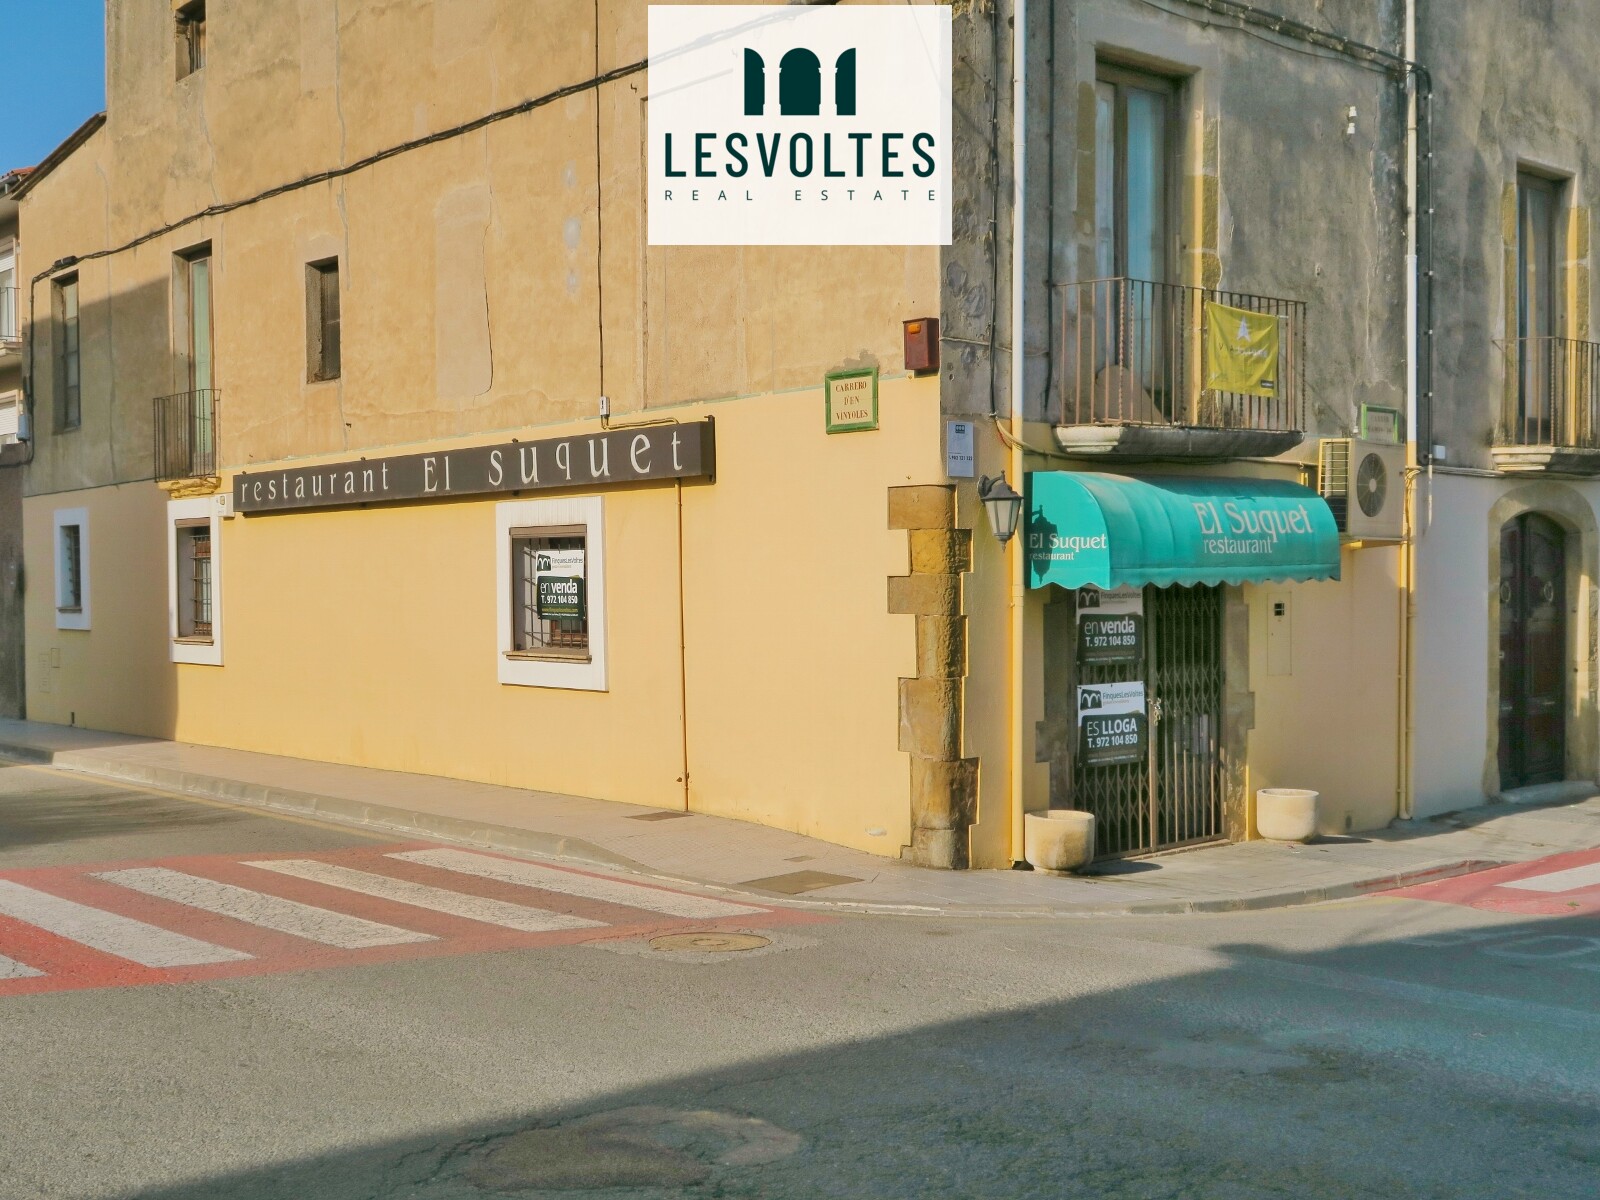 EXCLUSIVE RESTAURANT FULLY EQUIPPED FOR SALE OR FOR RENT WITH OPTION TO BUY, IN LA BISBAL D'EMPORDÀ.